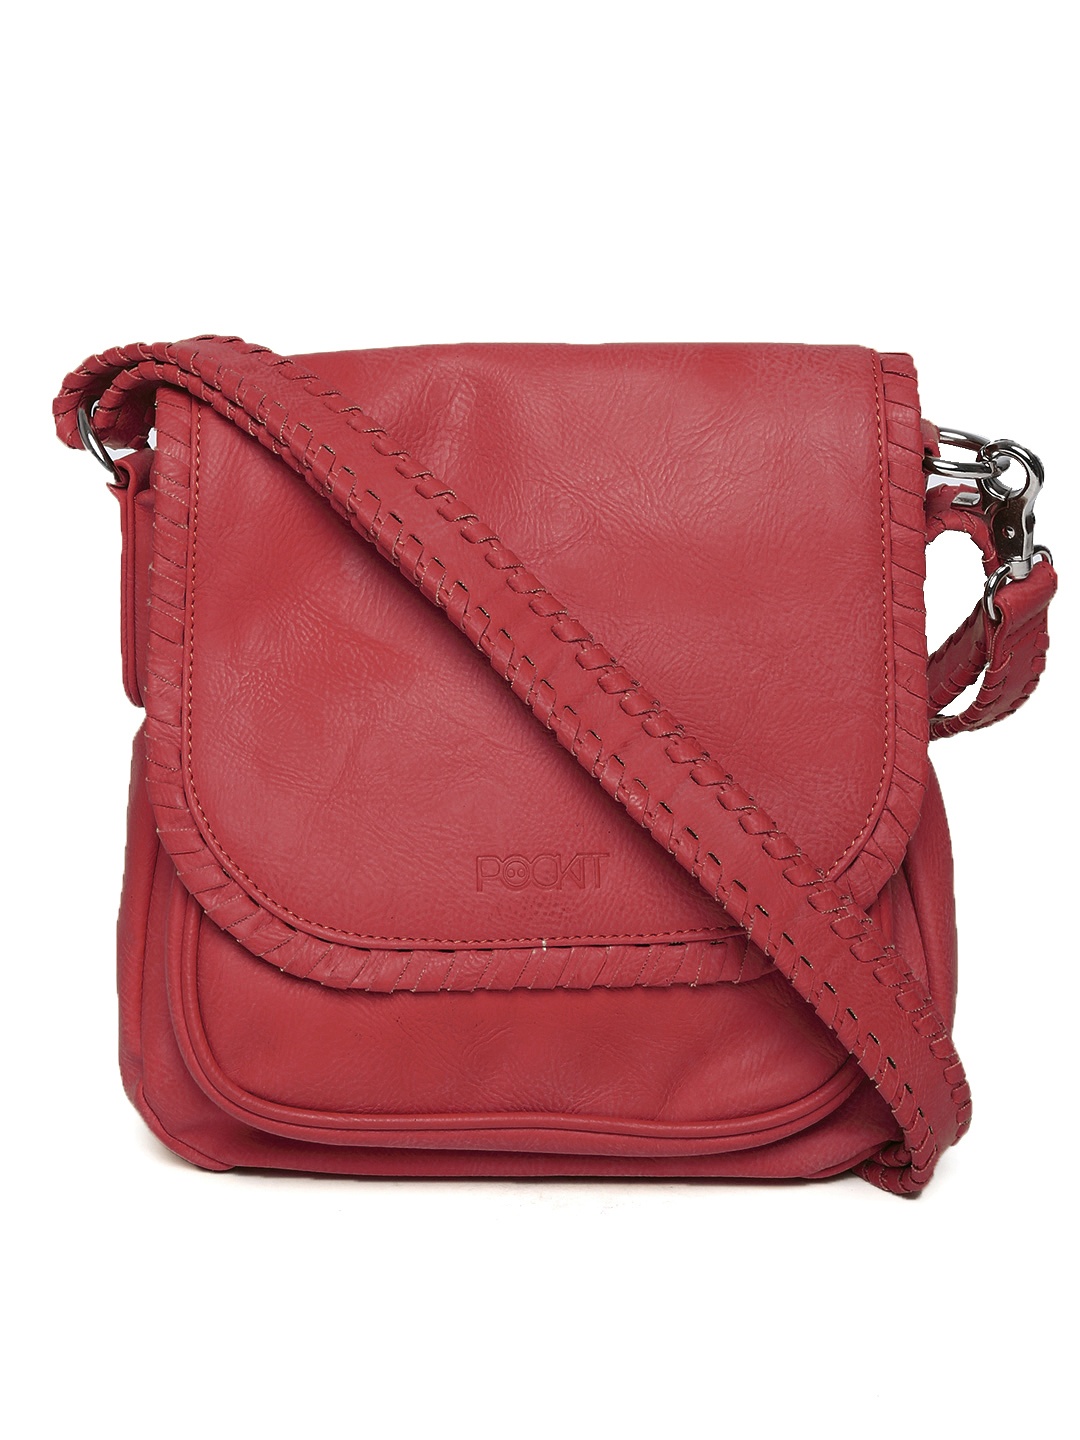 Myntra POCKIT Red Sling Bag 844784 | Buy Myntra at best price online. All myntra products with ...